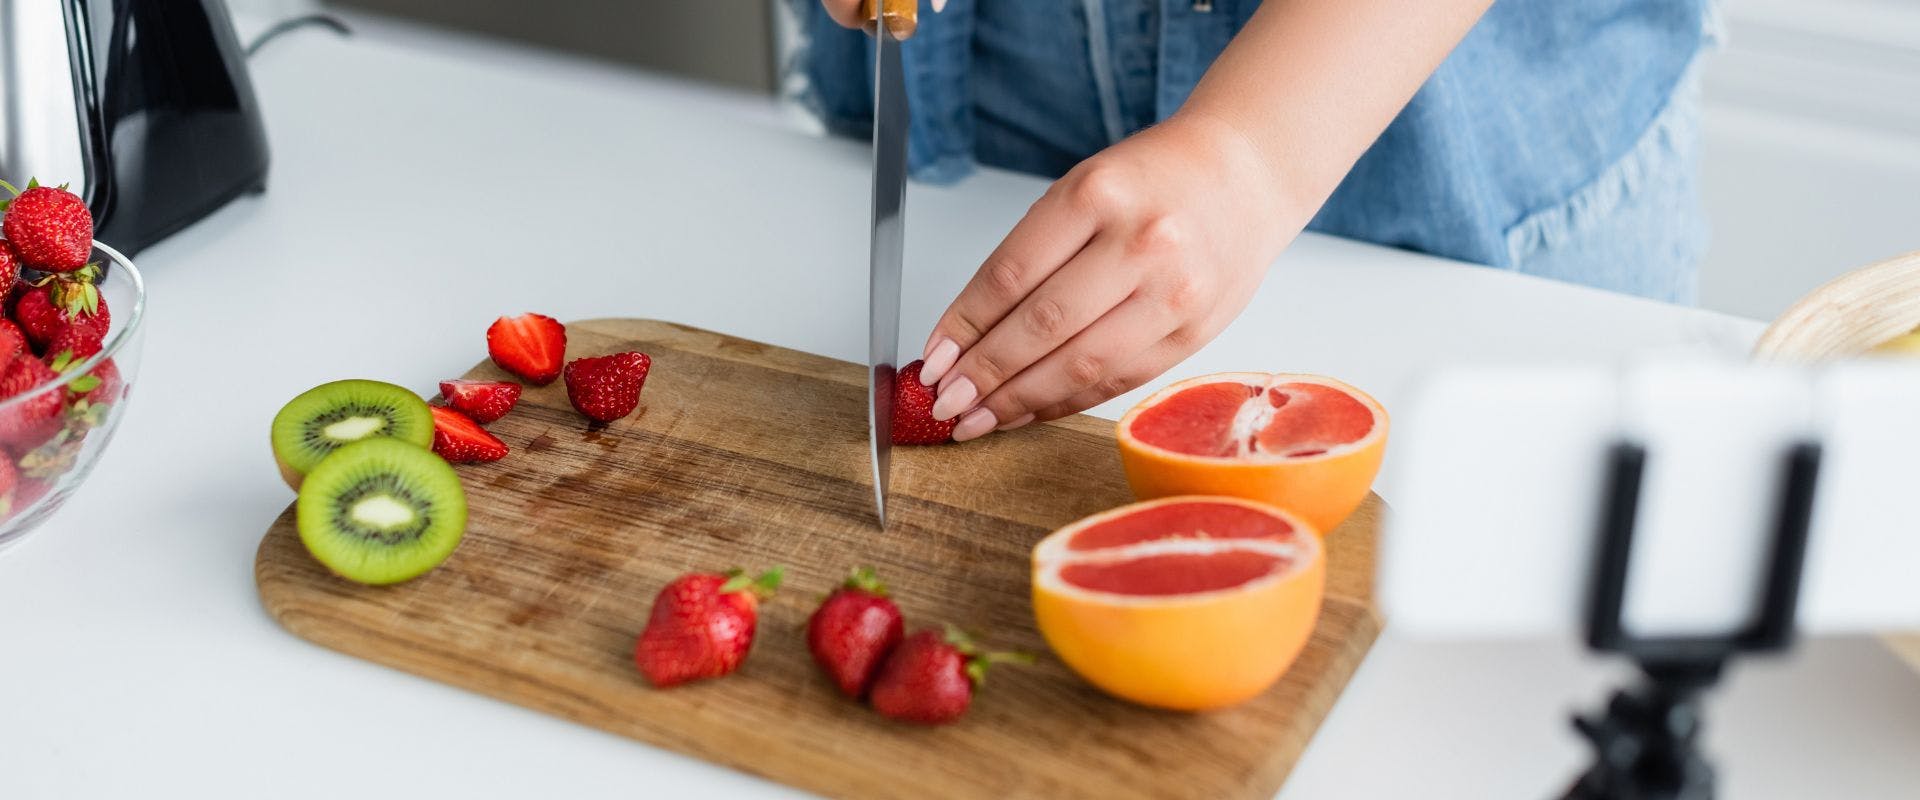 Strawberries being sliced on a wooden chopping board alongside a halved grapefruit and kiwi